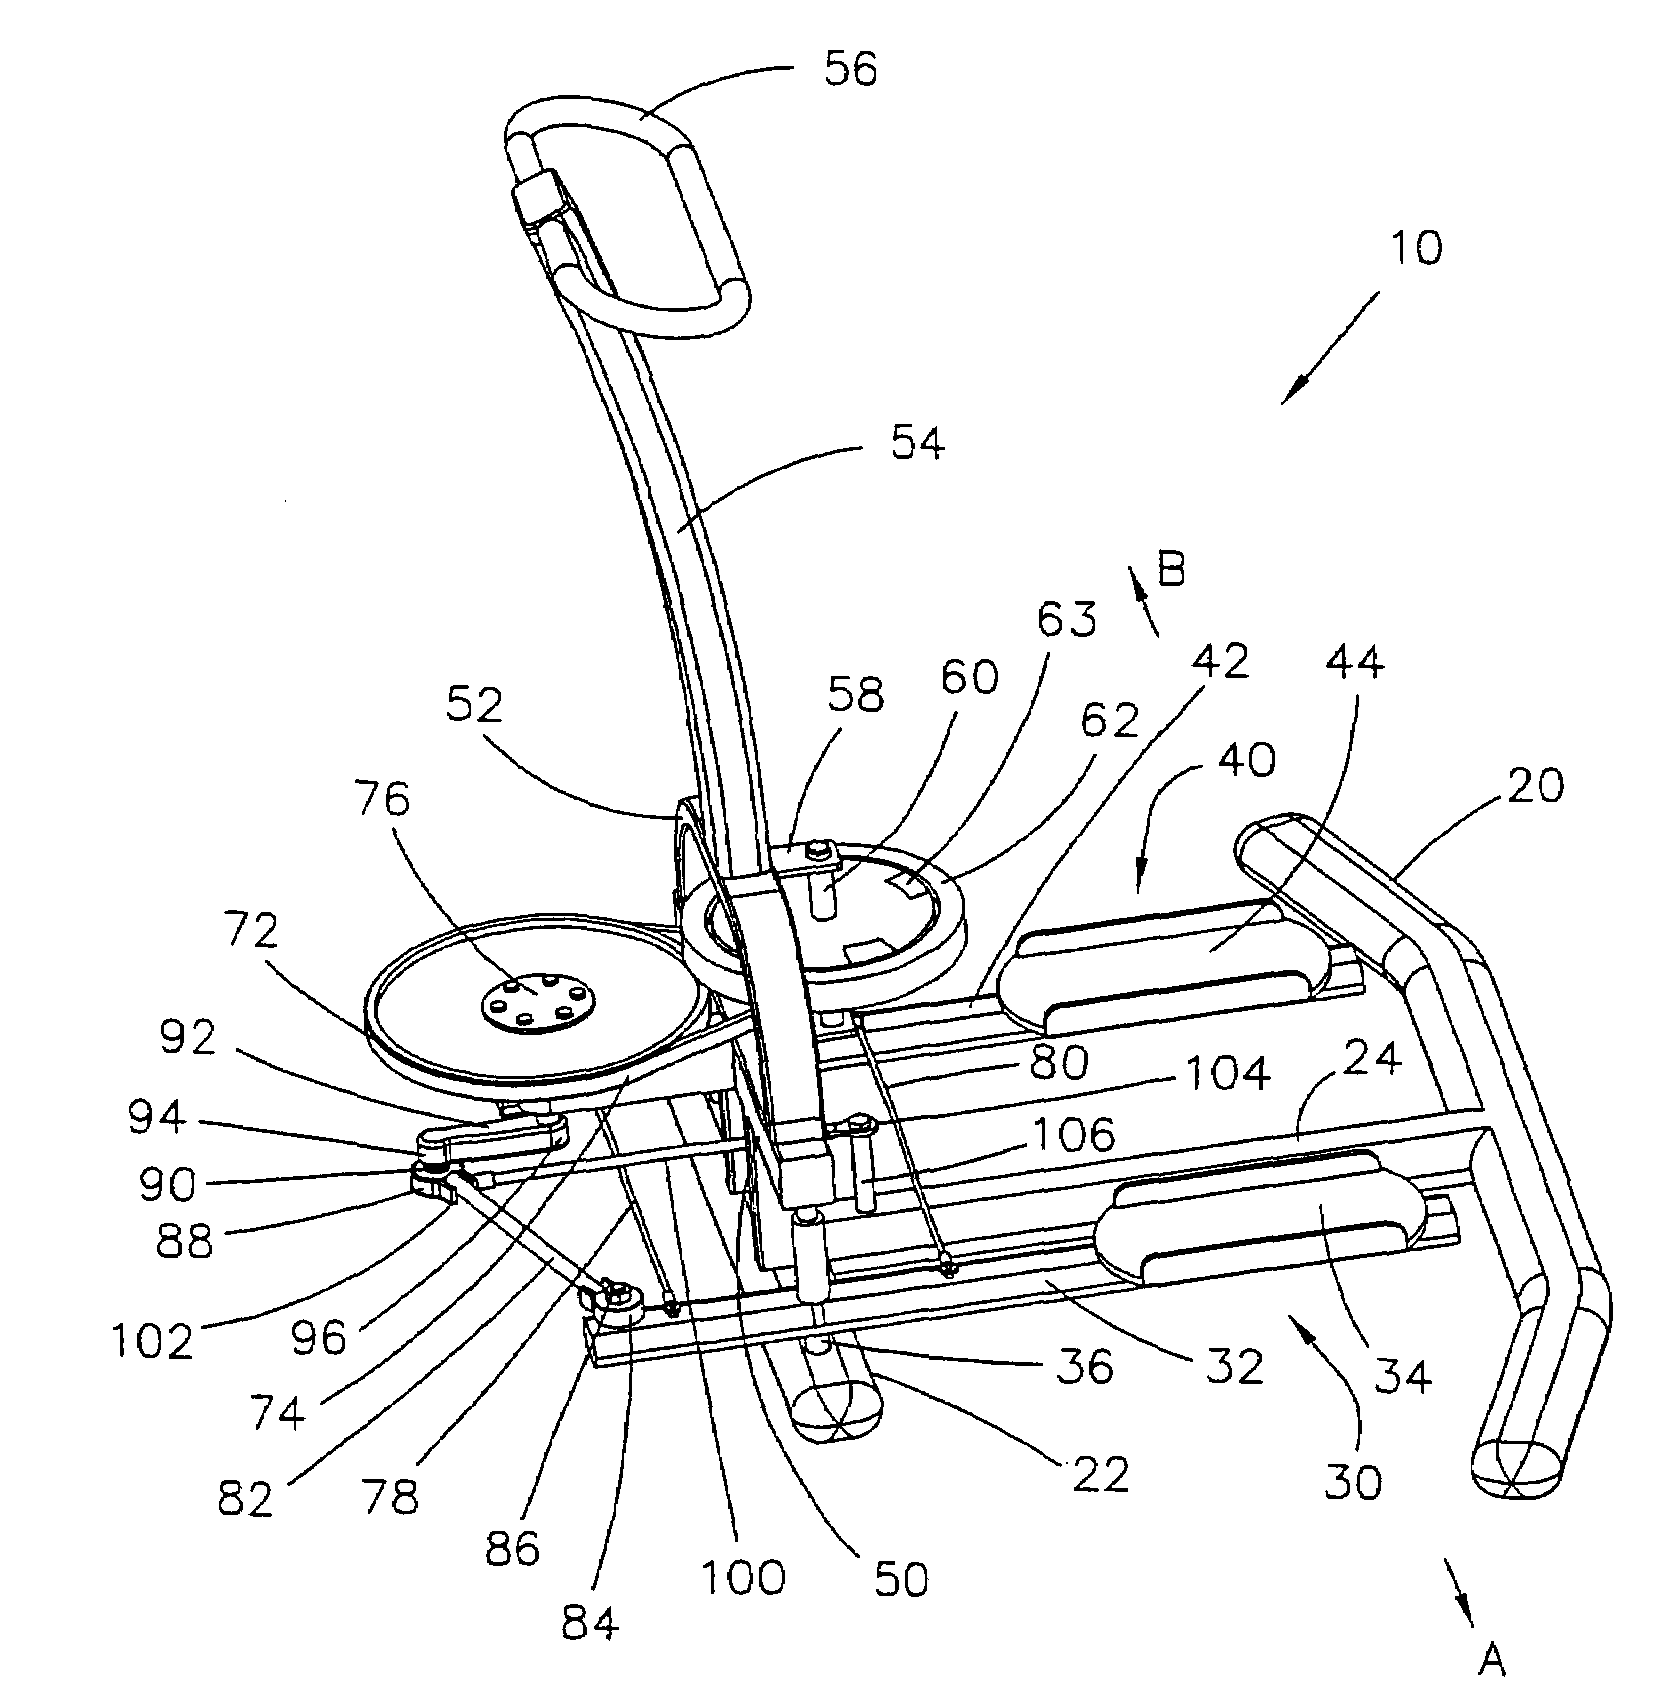 Apparatus to enable a user to simulate skating